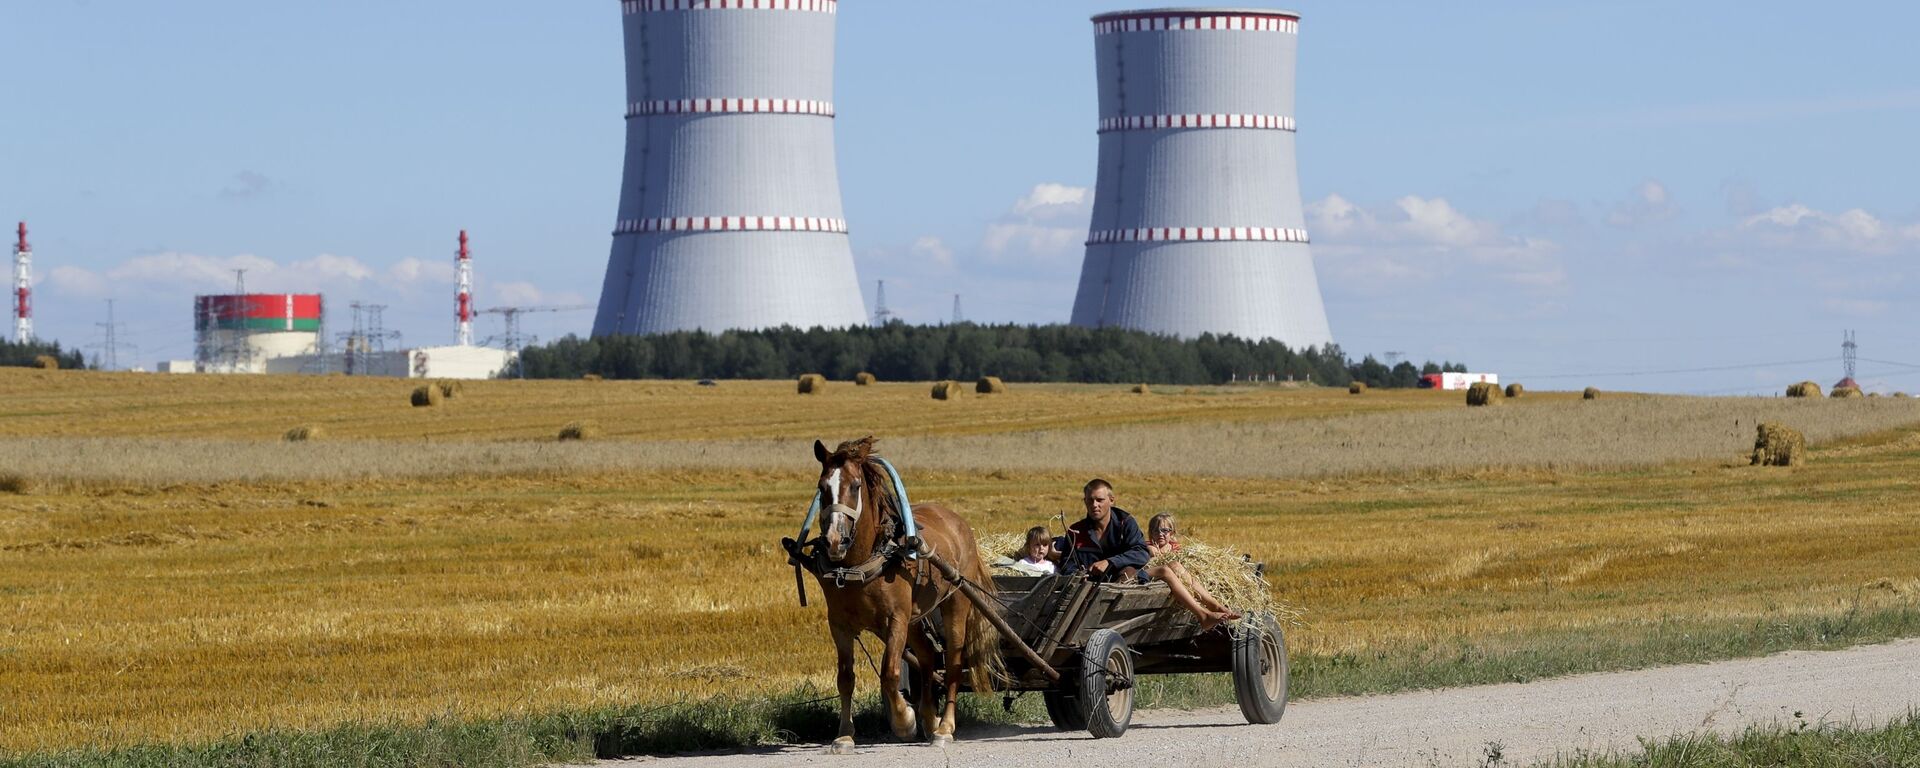 A man in a horse drawn carriage travels on a road, with Belarus's first nuclear plant which was built by Russia's state nuclear corporation Rosatom in the background near Astravets, Belarus, Friday, Aug. 7, 2020 - Sputnik International, 1920